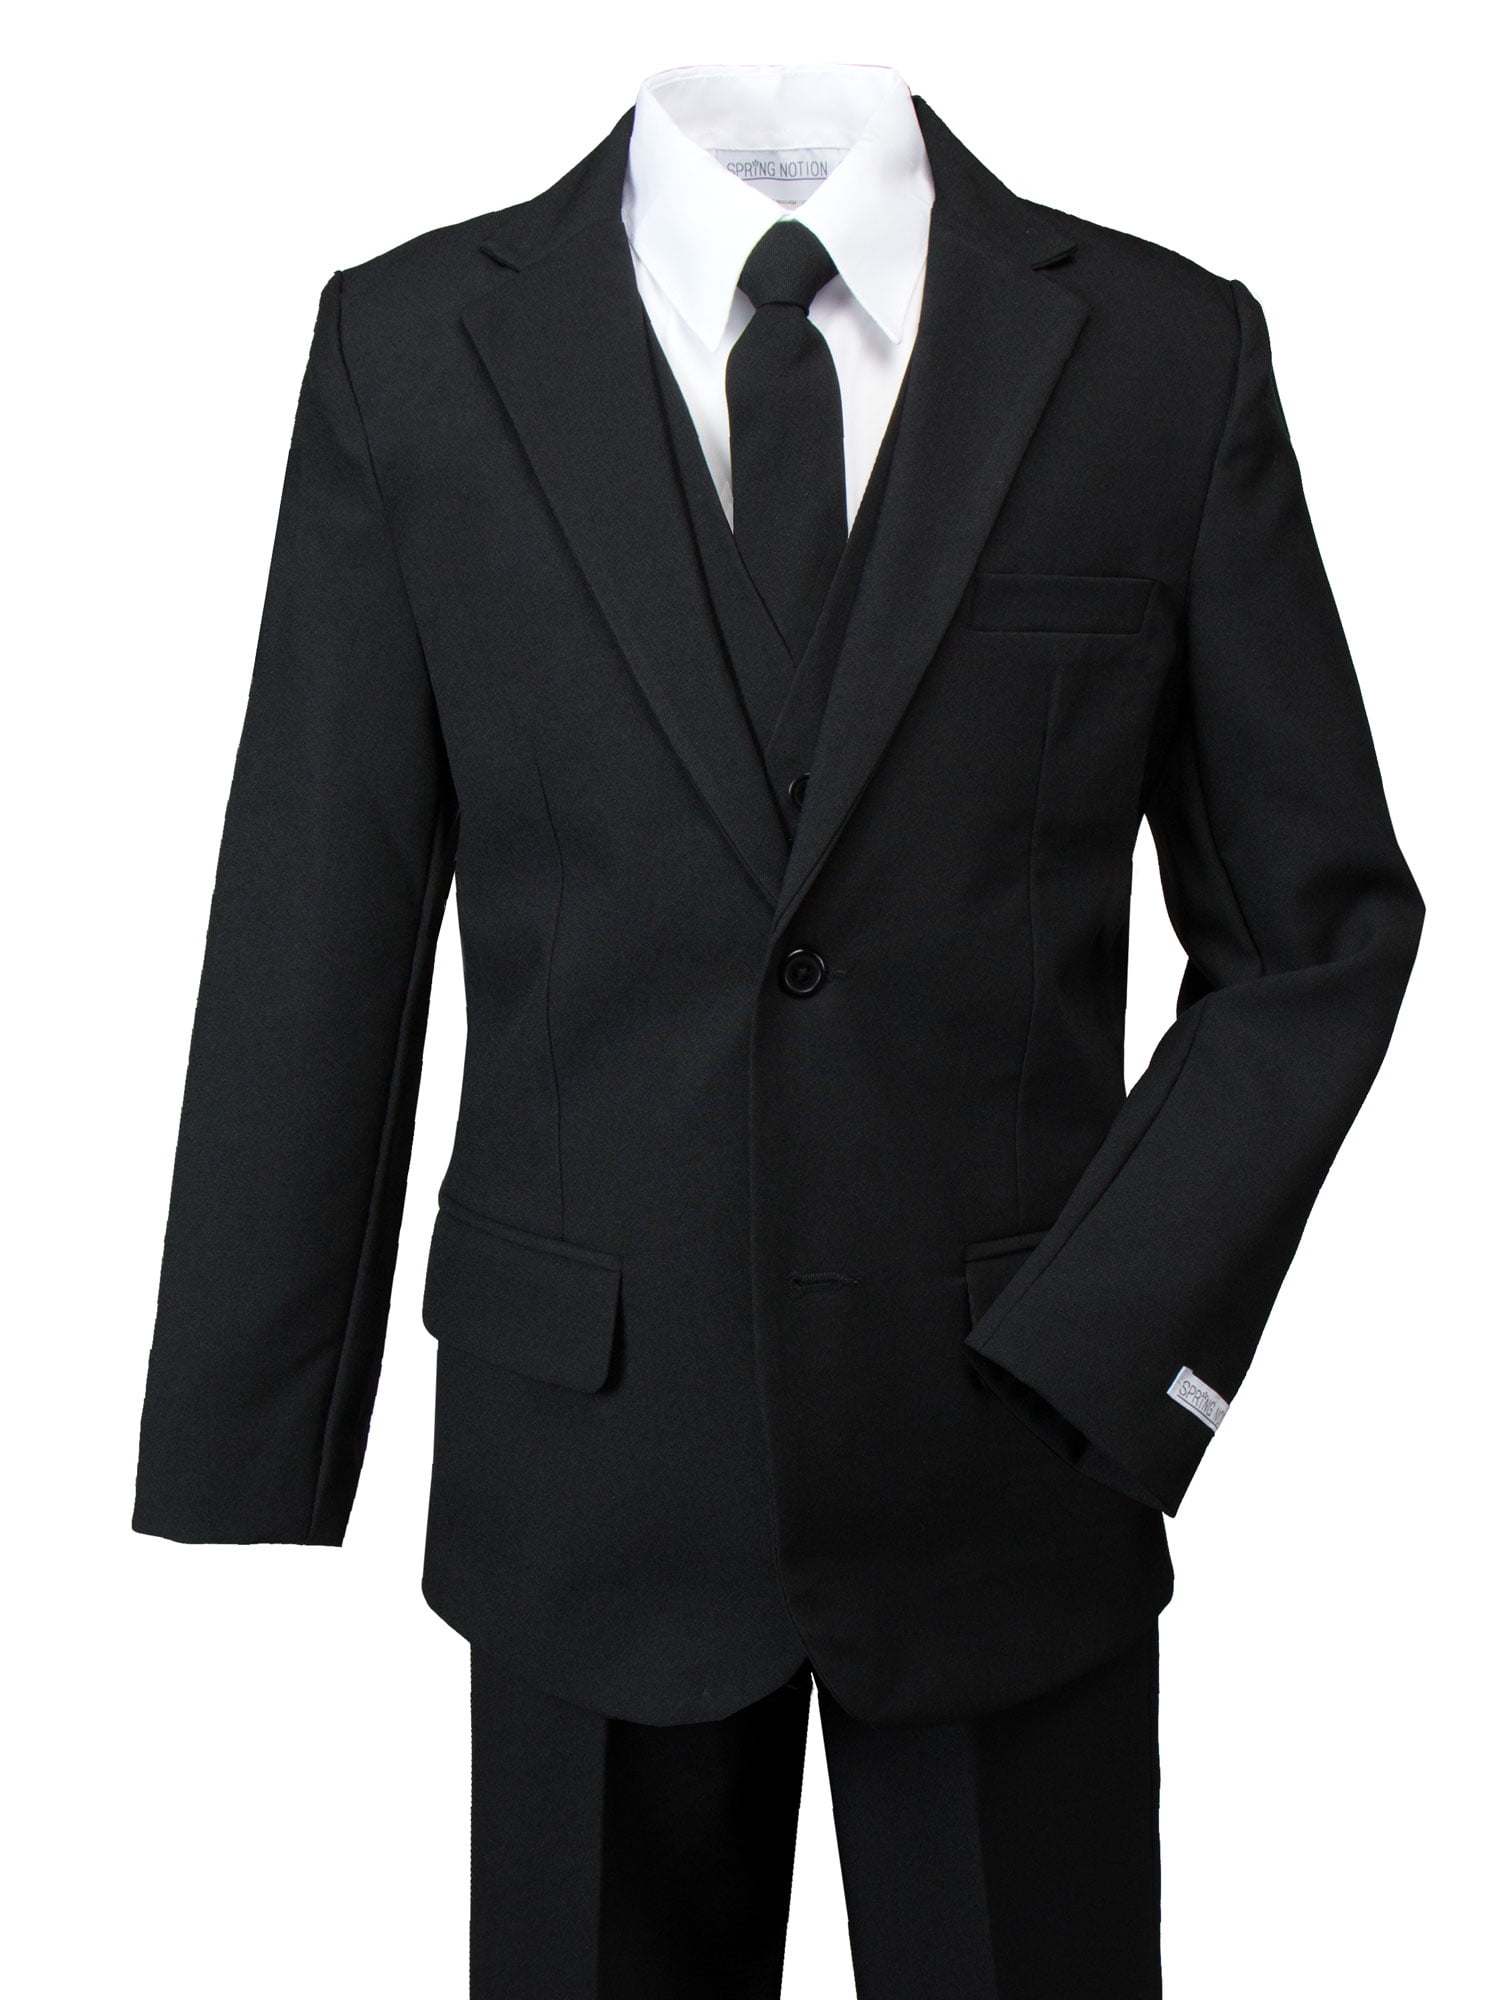 Boys-Black-Tuxedo-Suit-5-Piece-Prom-Cruise-Party-James 6 months 15 years 